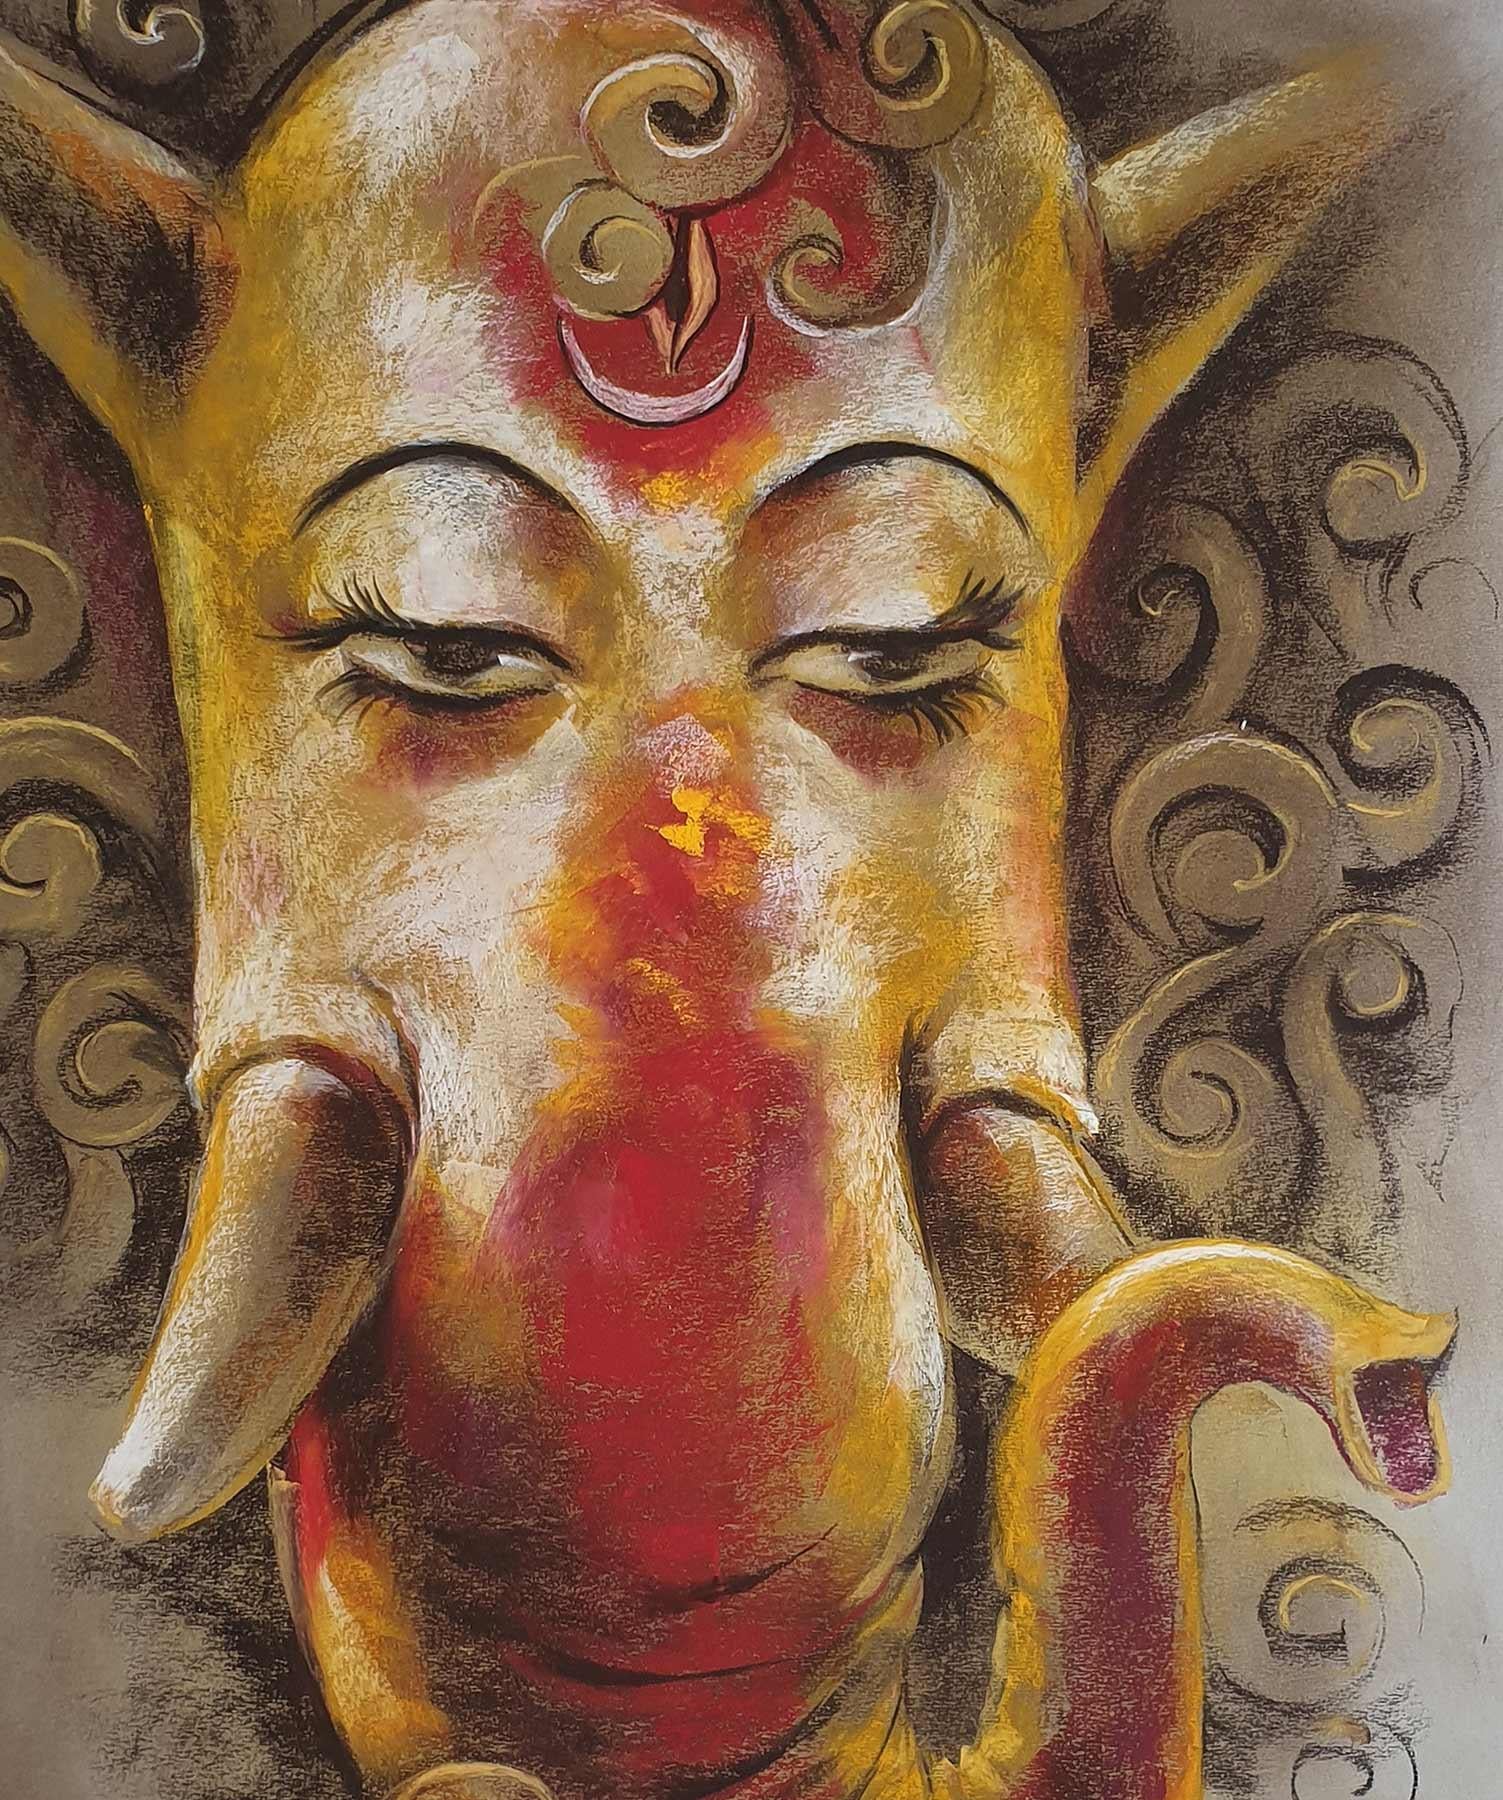 Sanatan Dinda - Ganesha - 28 x 20 inches (unframed size)
Conte & Dry Pastel on Paper
Proposed Frame Size :  3 inches mount on all sides and 1 Inch frame
Supported by Artist's Authenticity Certificate.
Inclusive of shipment in roll form.

Style :